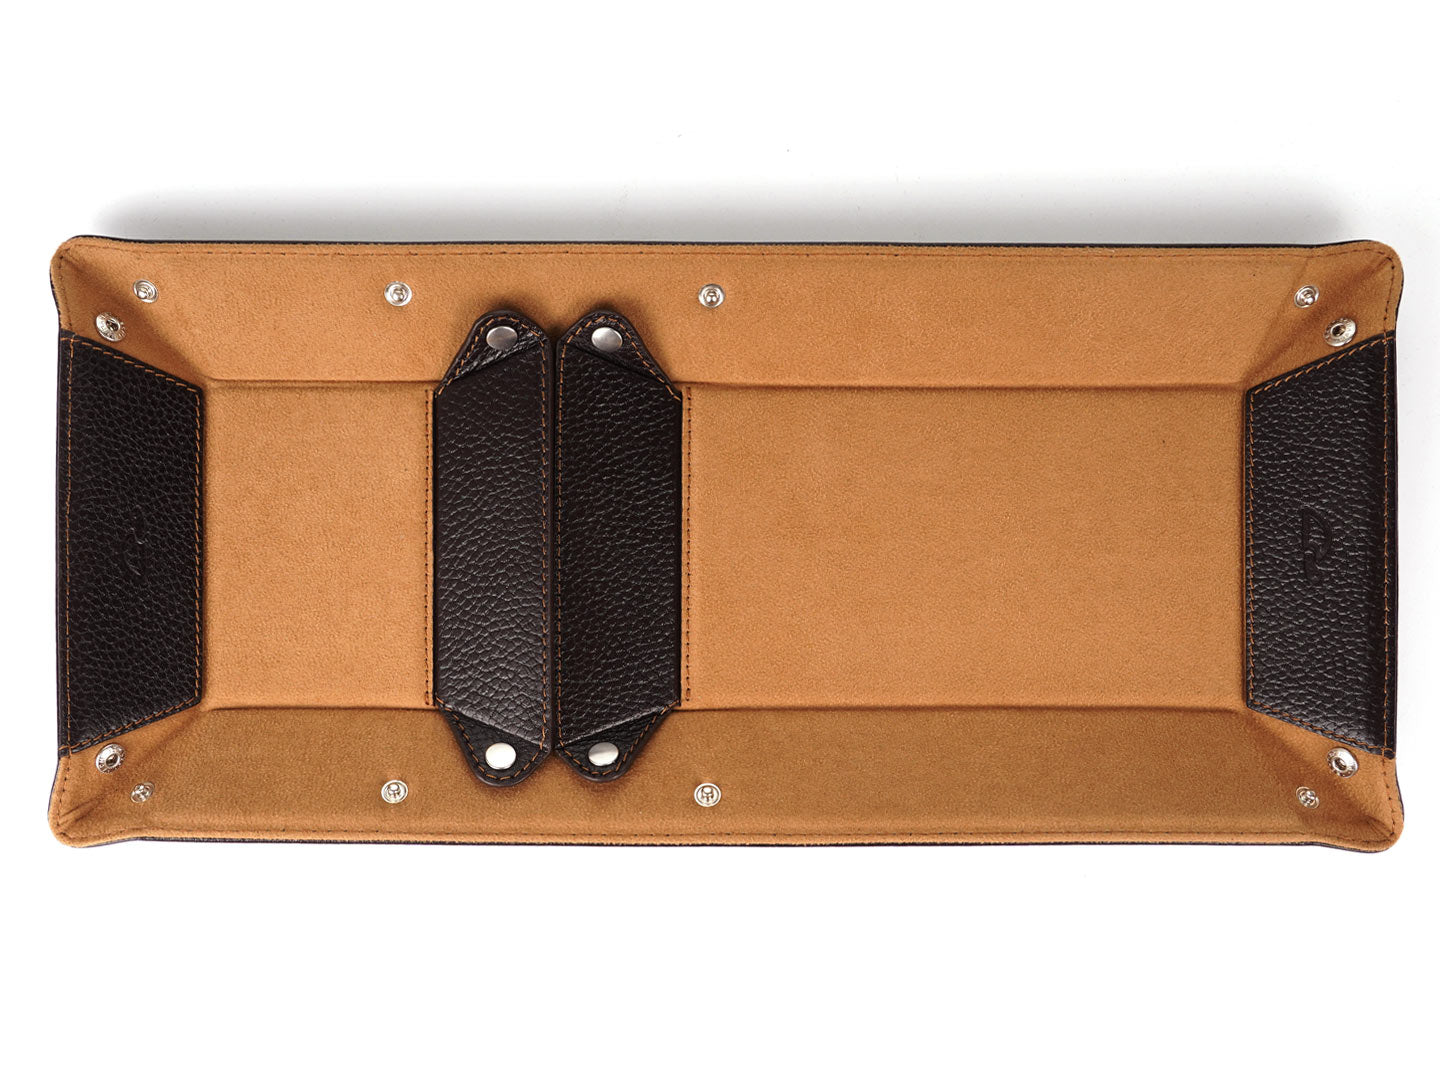 DESK ORGANIZER - Leather Catchall Office - Pen & Card Holder - brown grained leather - flat - Carapaz